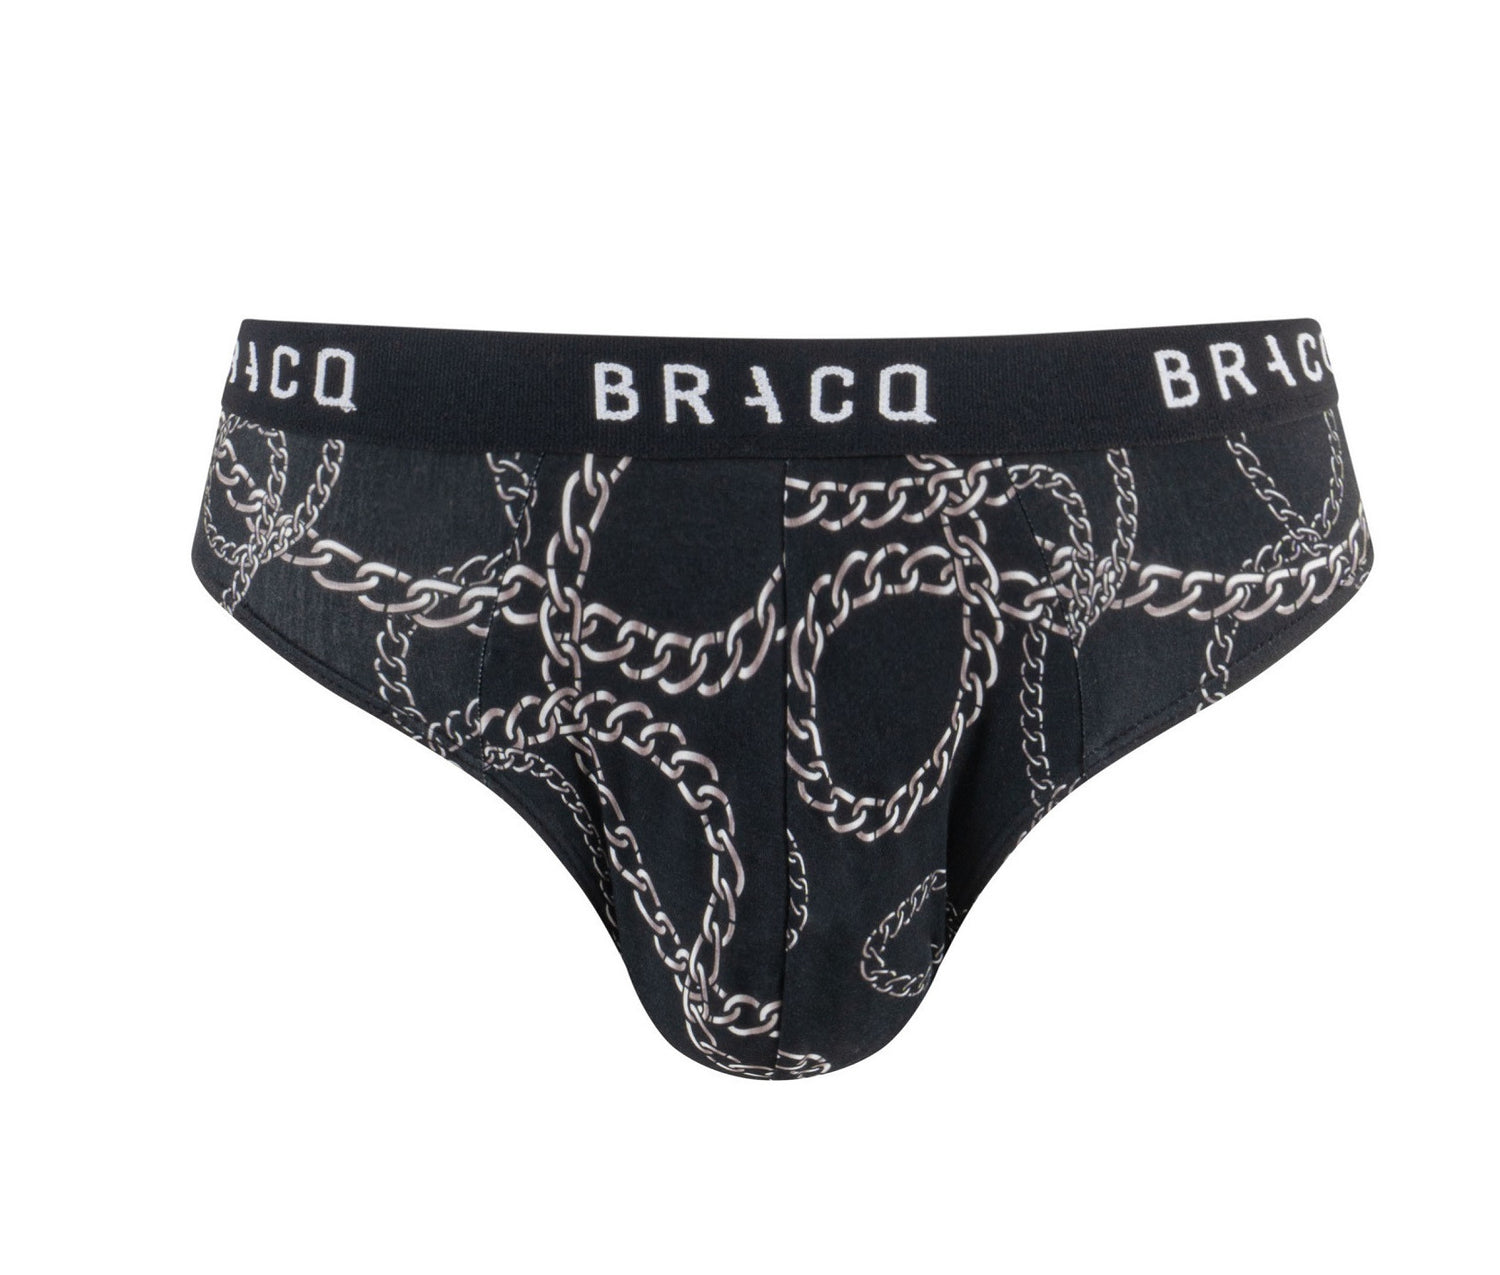 Bracq "Homme" Collection